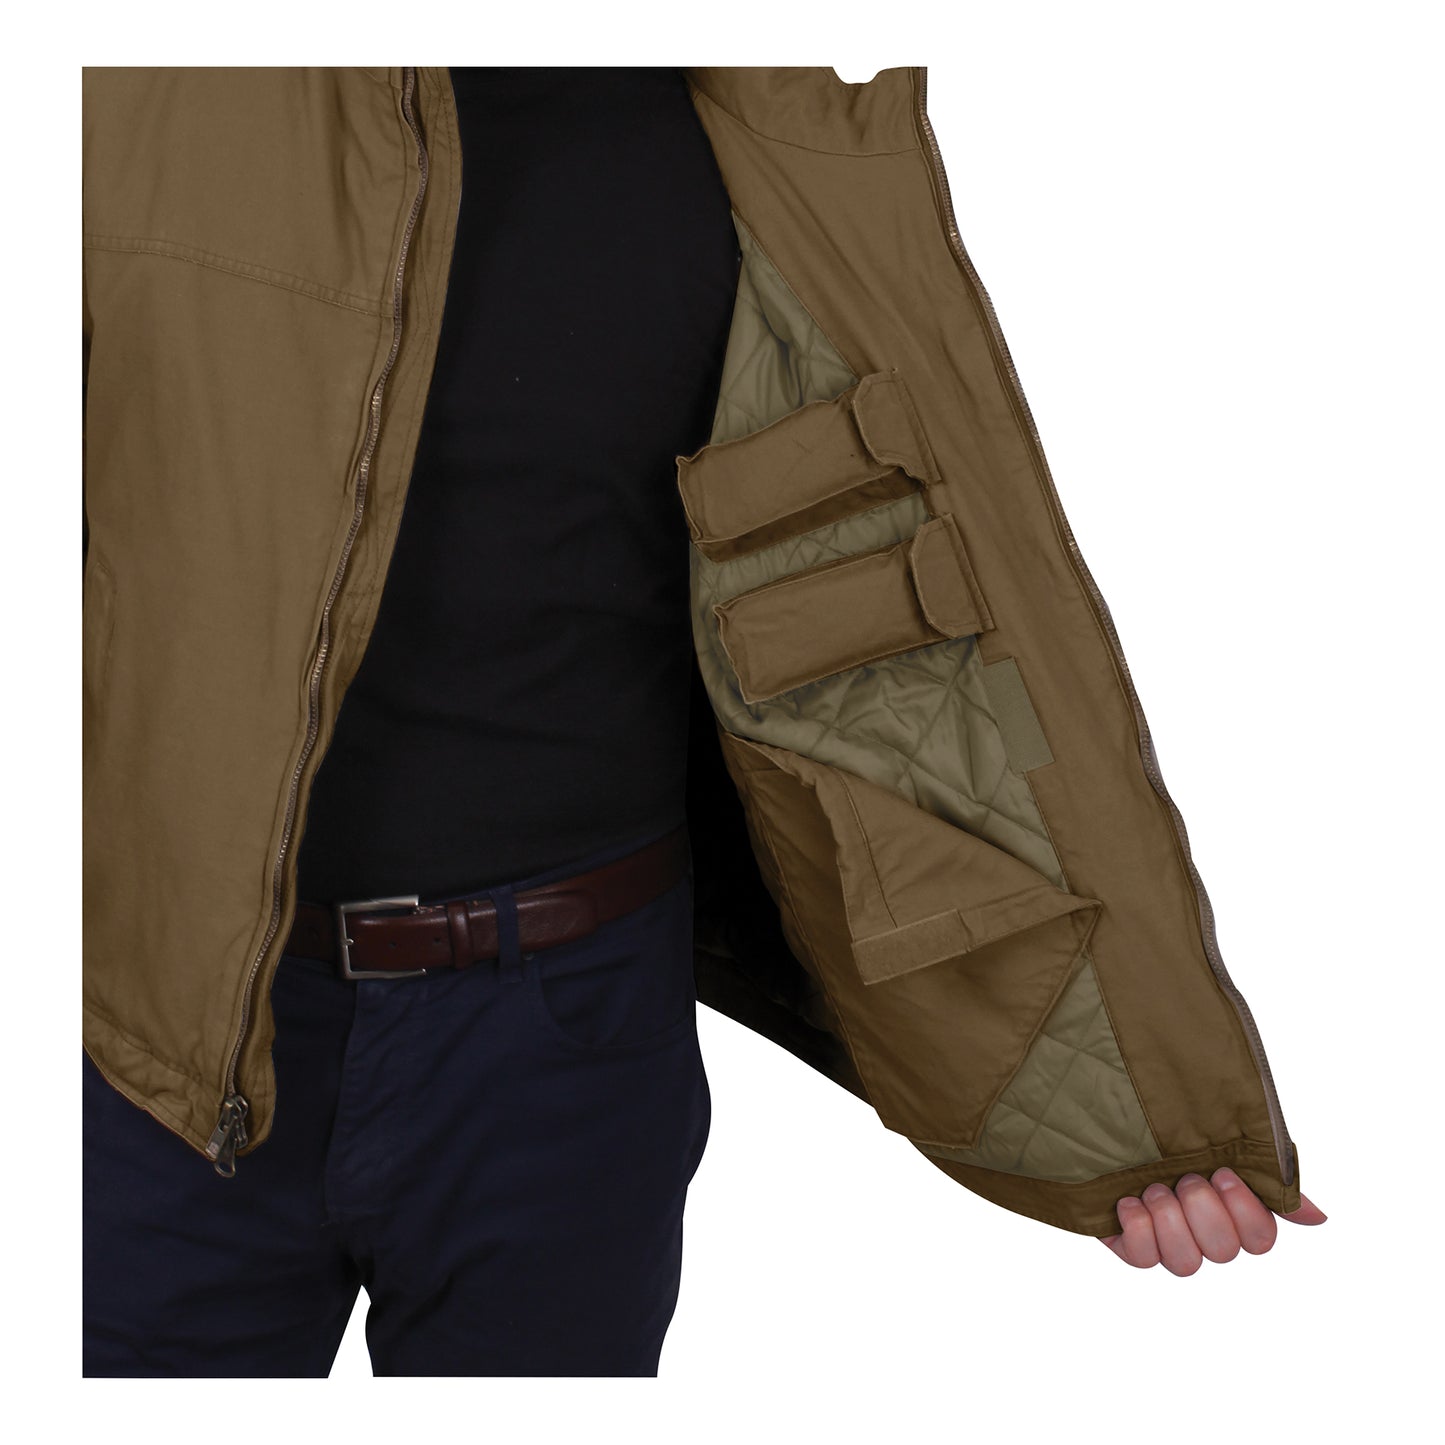 Rothco Concealed Carry 3 Season Jacket - Coyote Brown